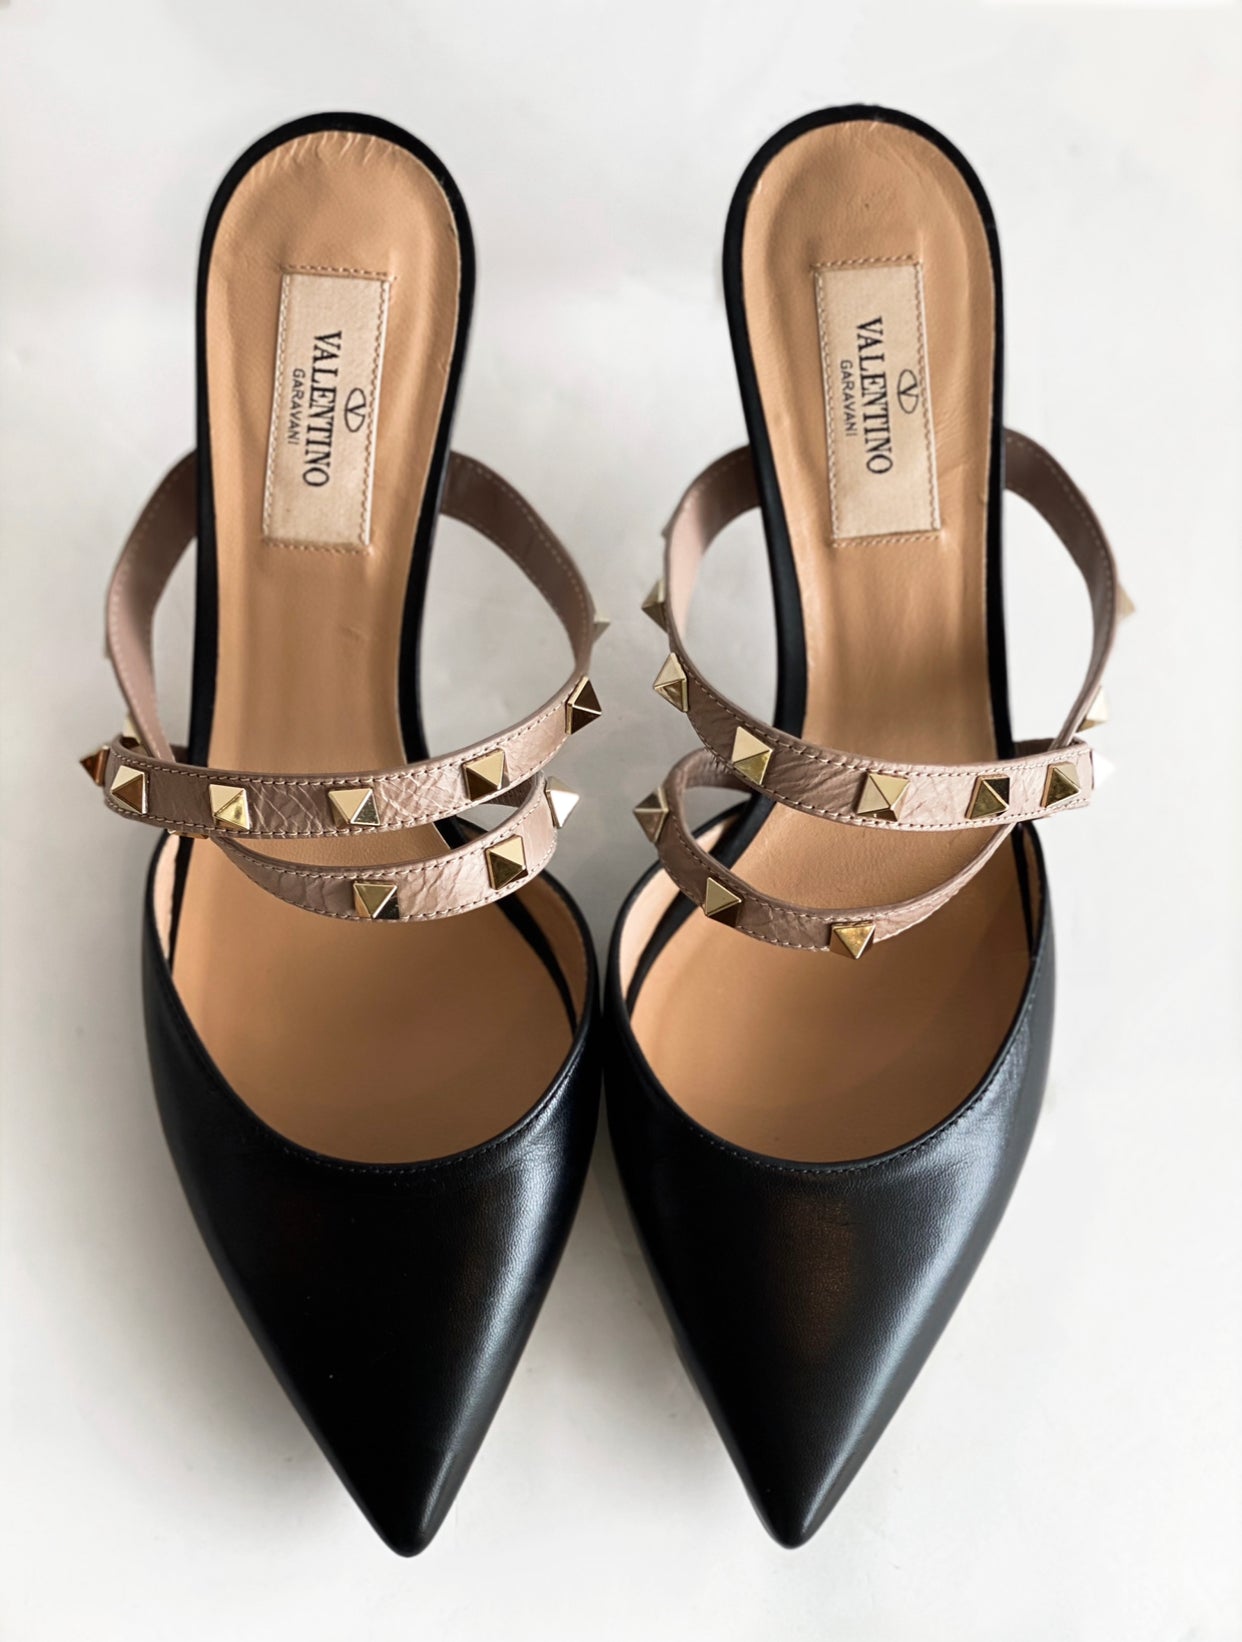 Valentino Rockstud Mules Black Top of Shoes